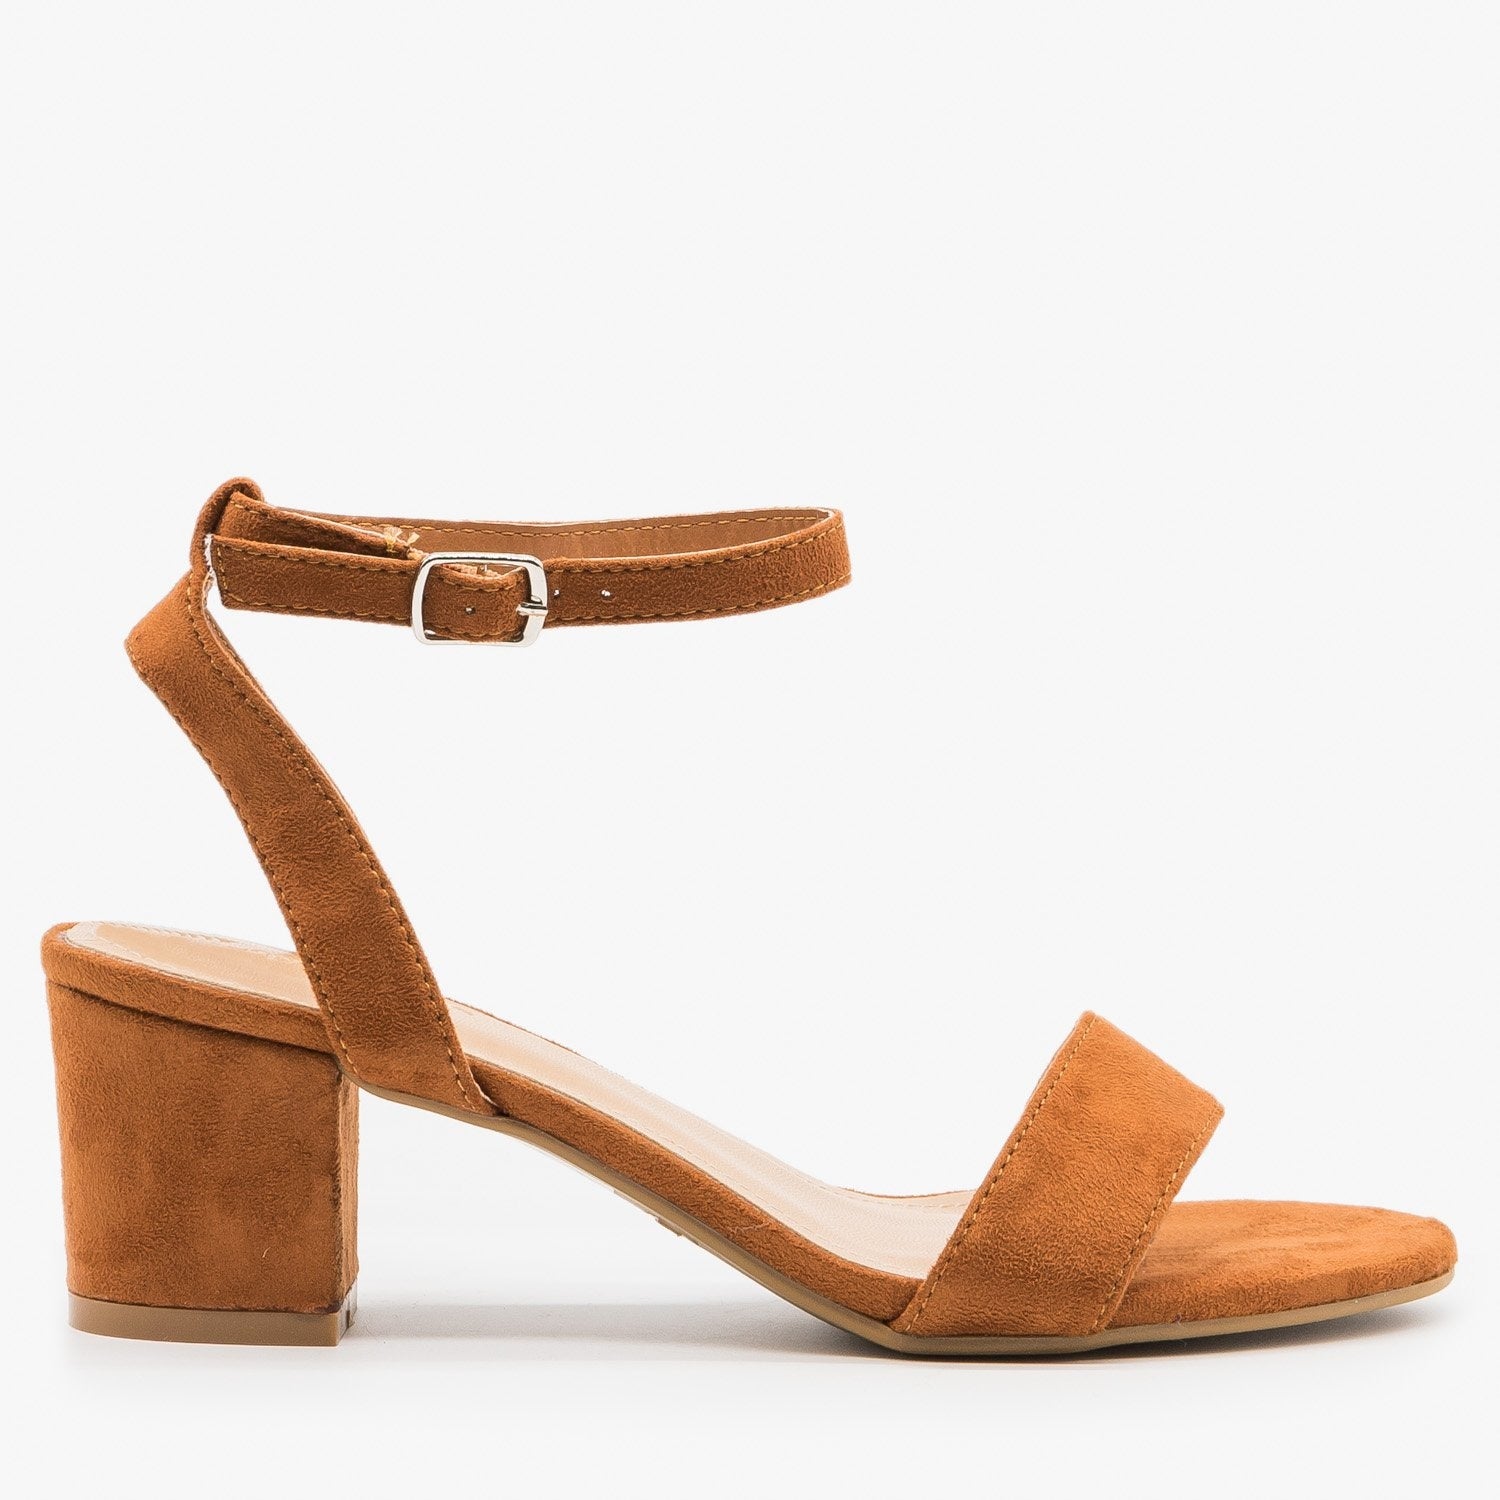 Simple Low Heel Sandals - Anna Shoes 